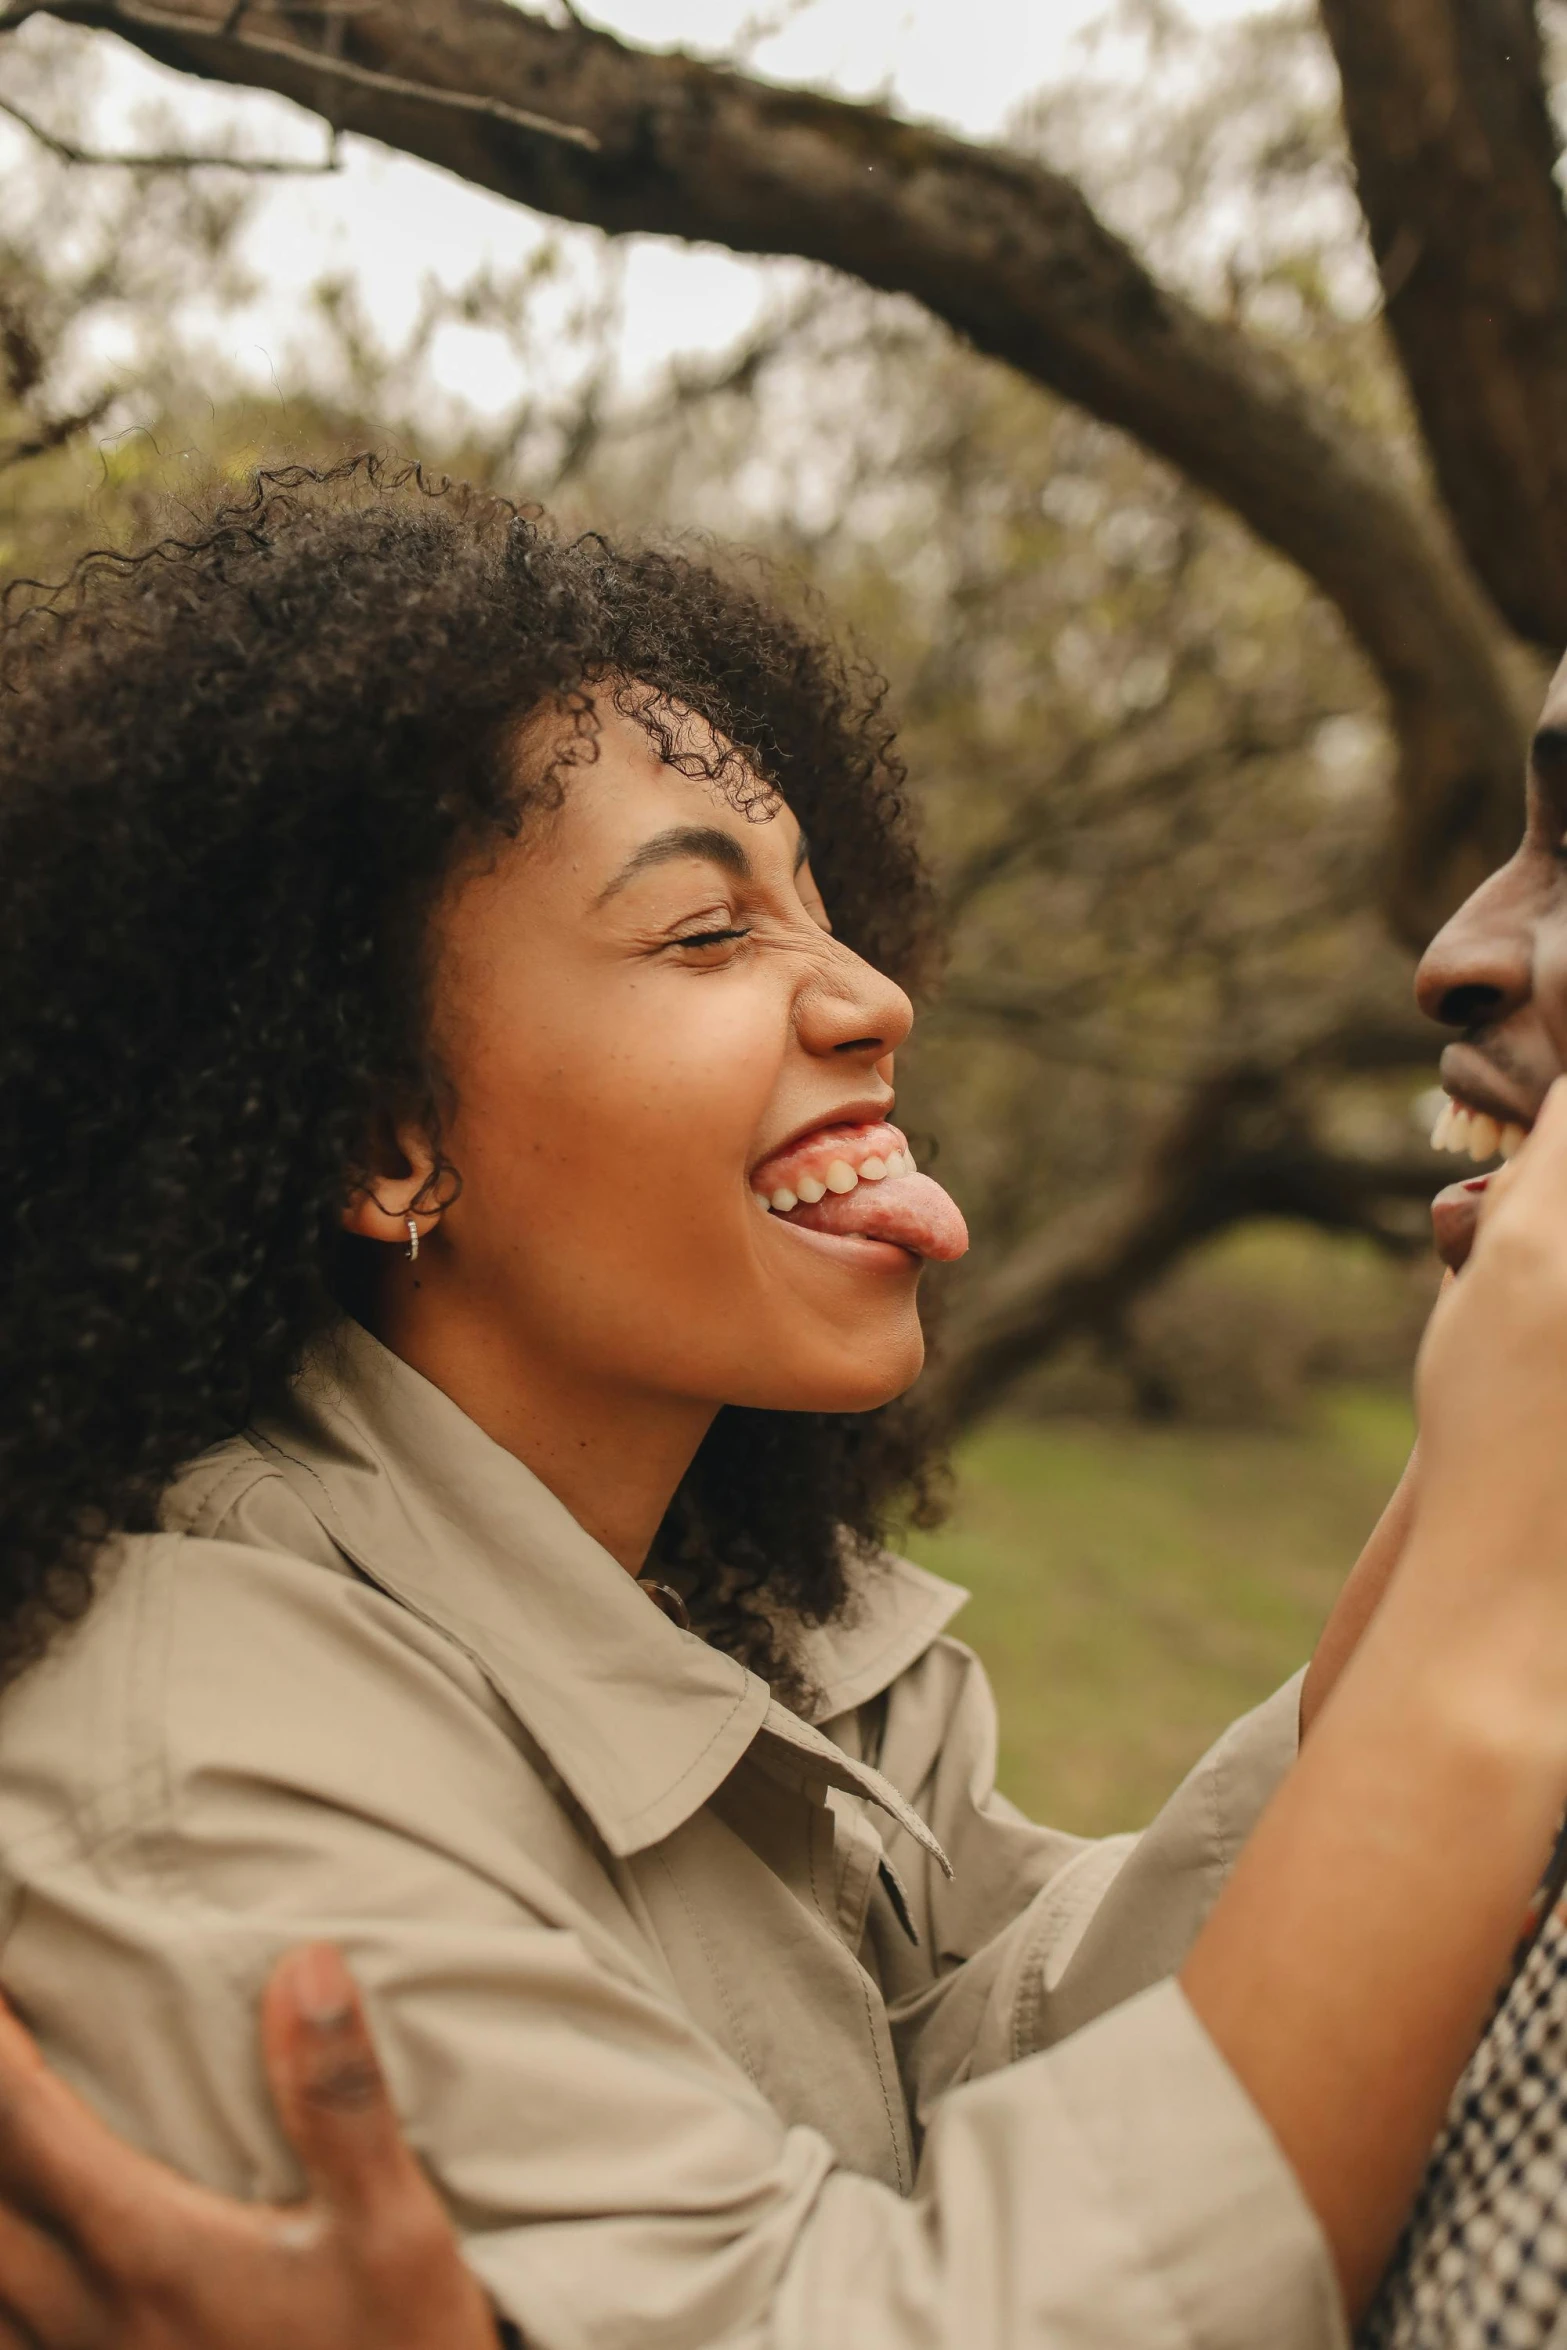 a man and a woman standing next to each other, trending on pexels, happening, licking tongue, brown skin like soil, smiling young woman, with a long